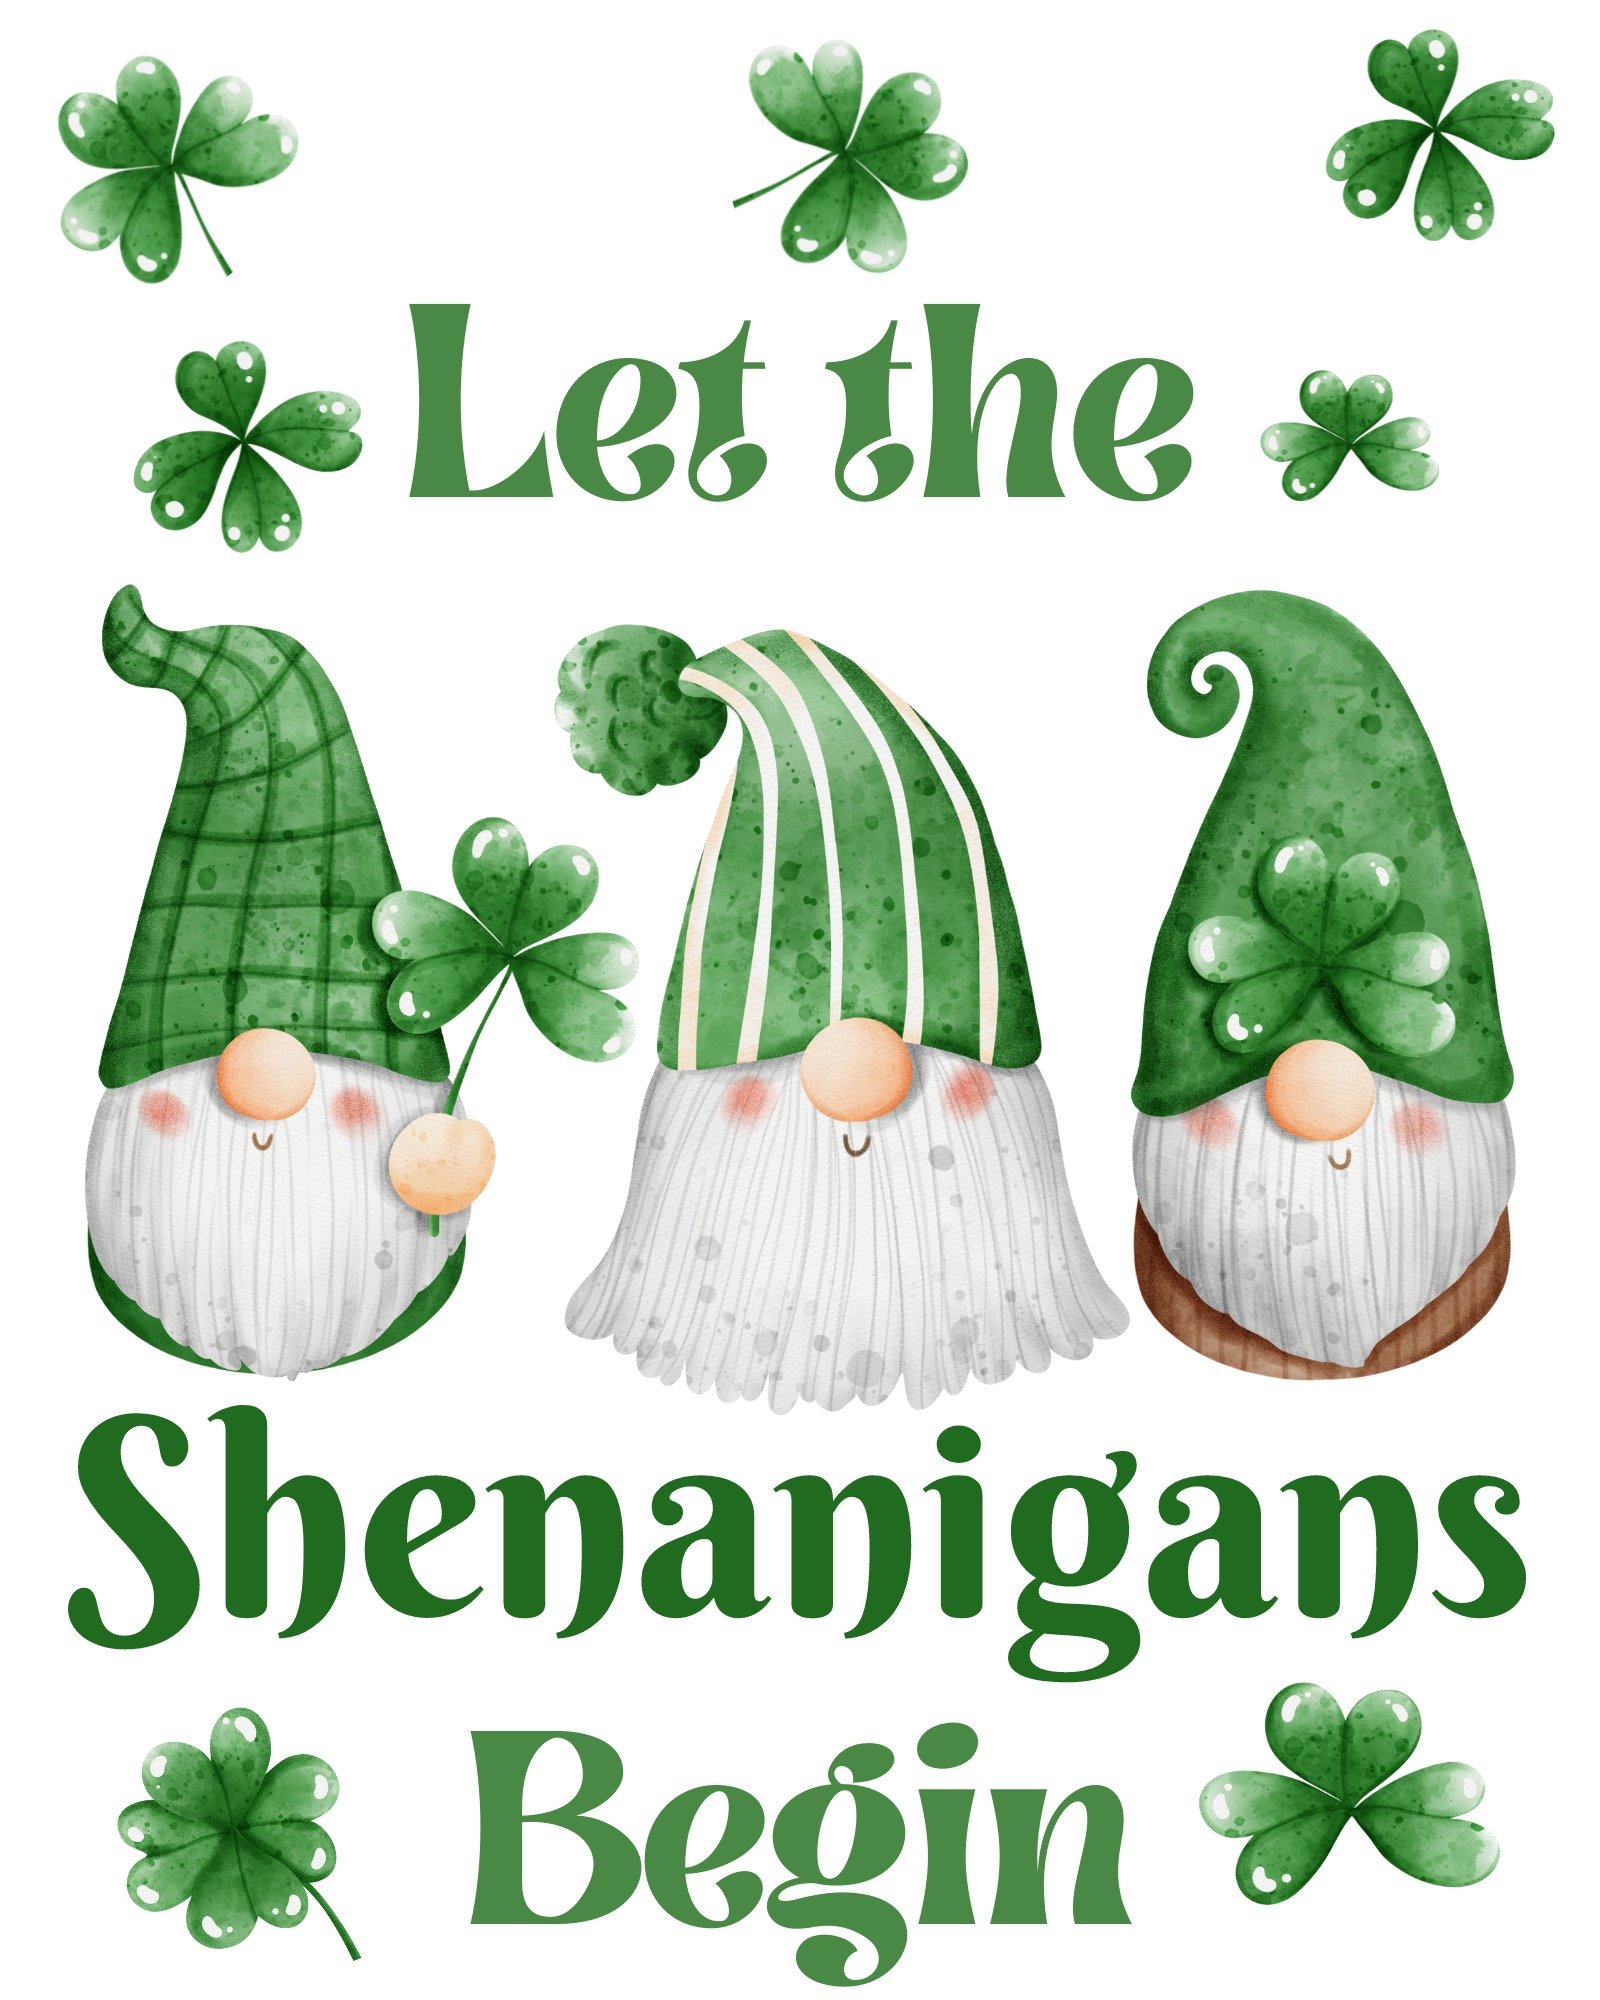 3 st patricks day gnomes with the phrase "let the shenanigans begin"